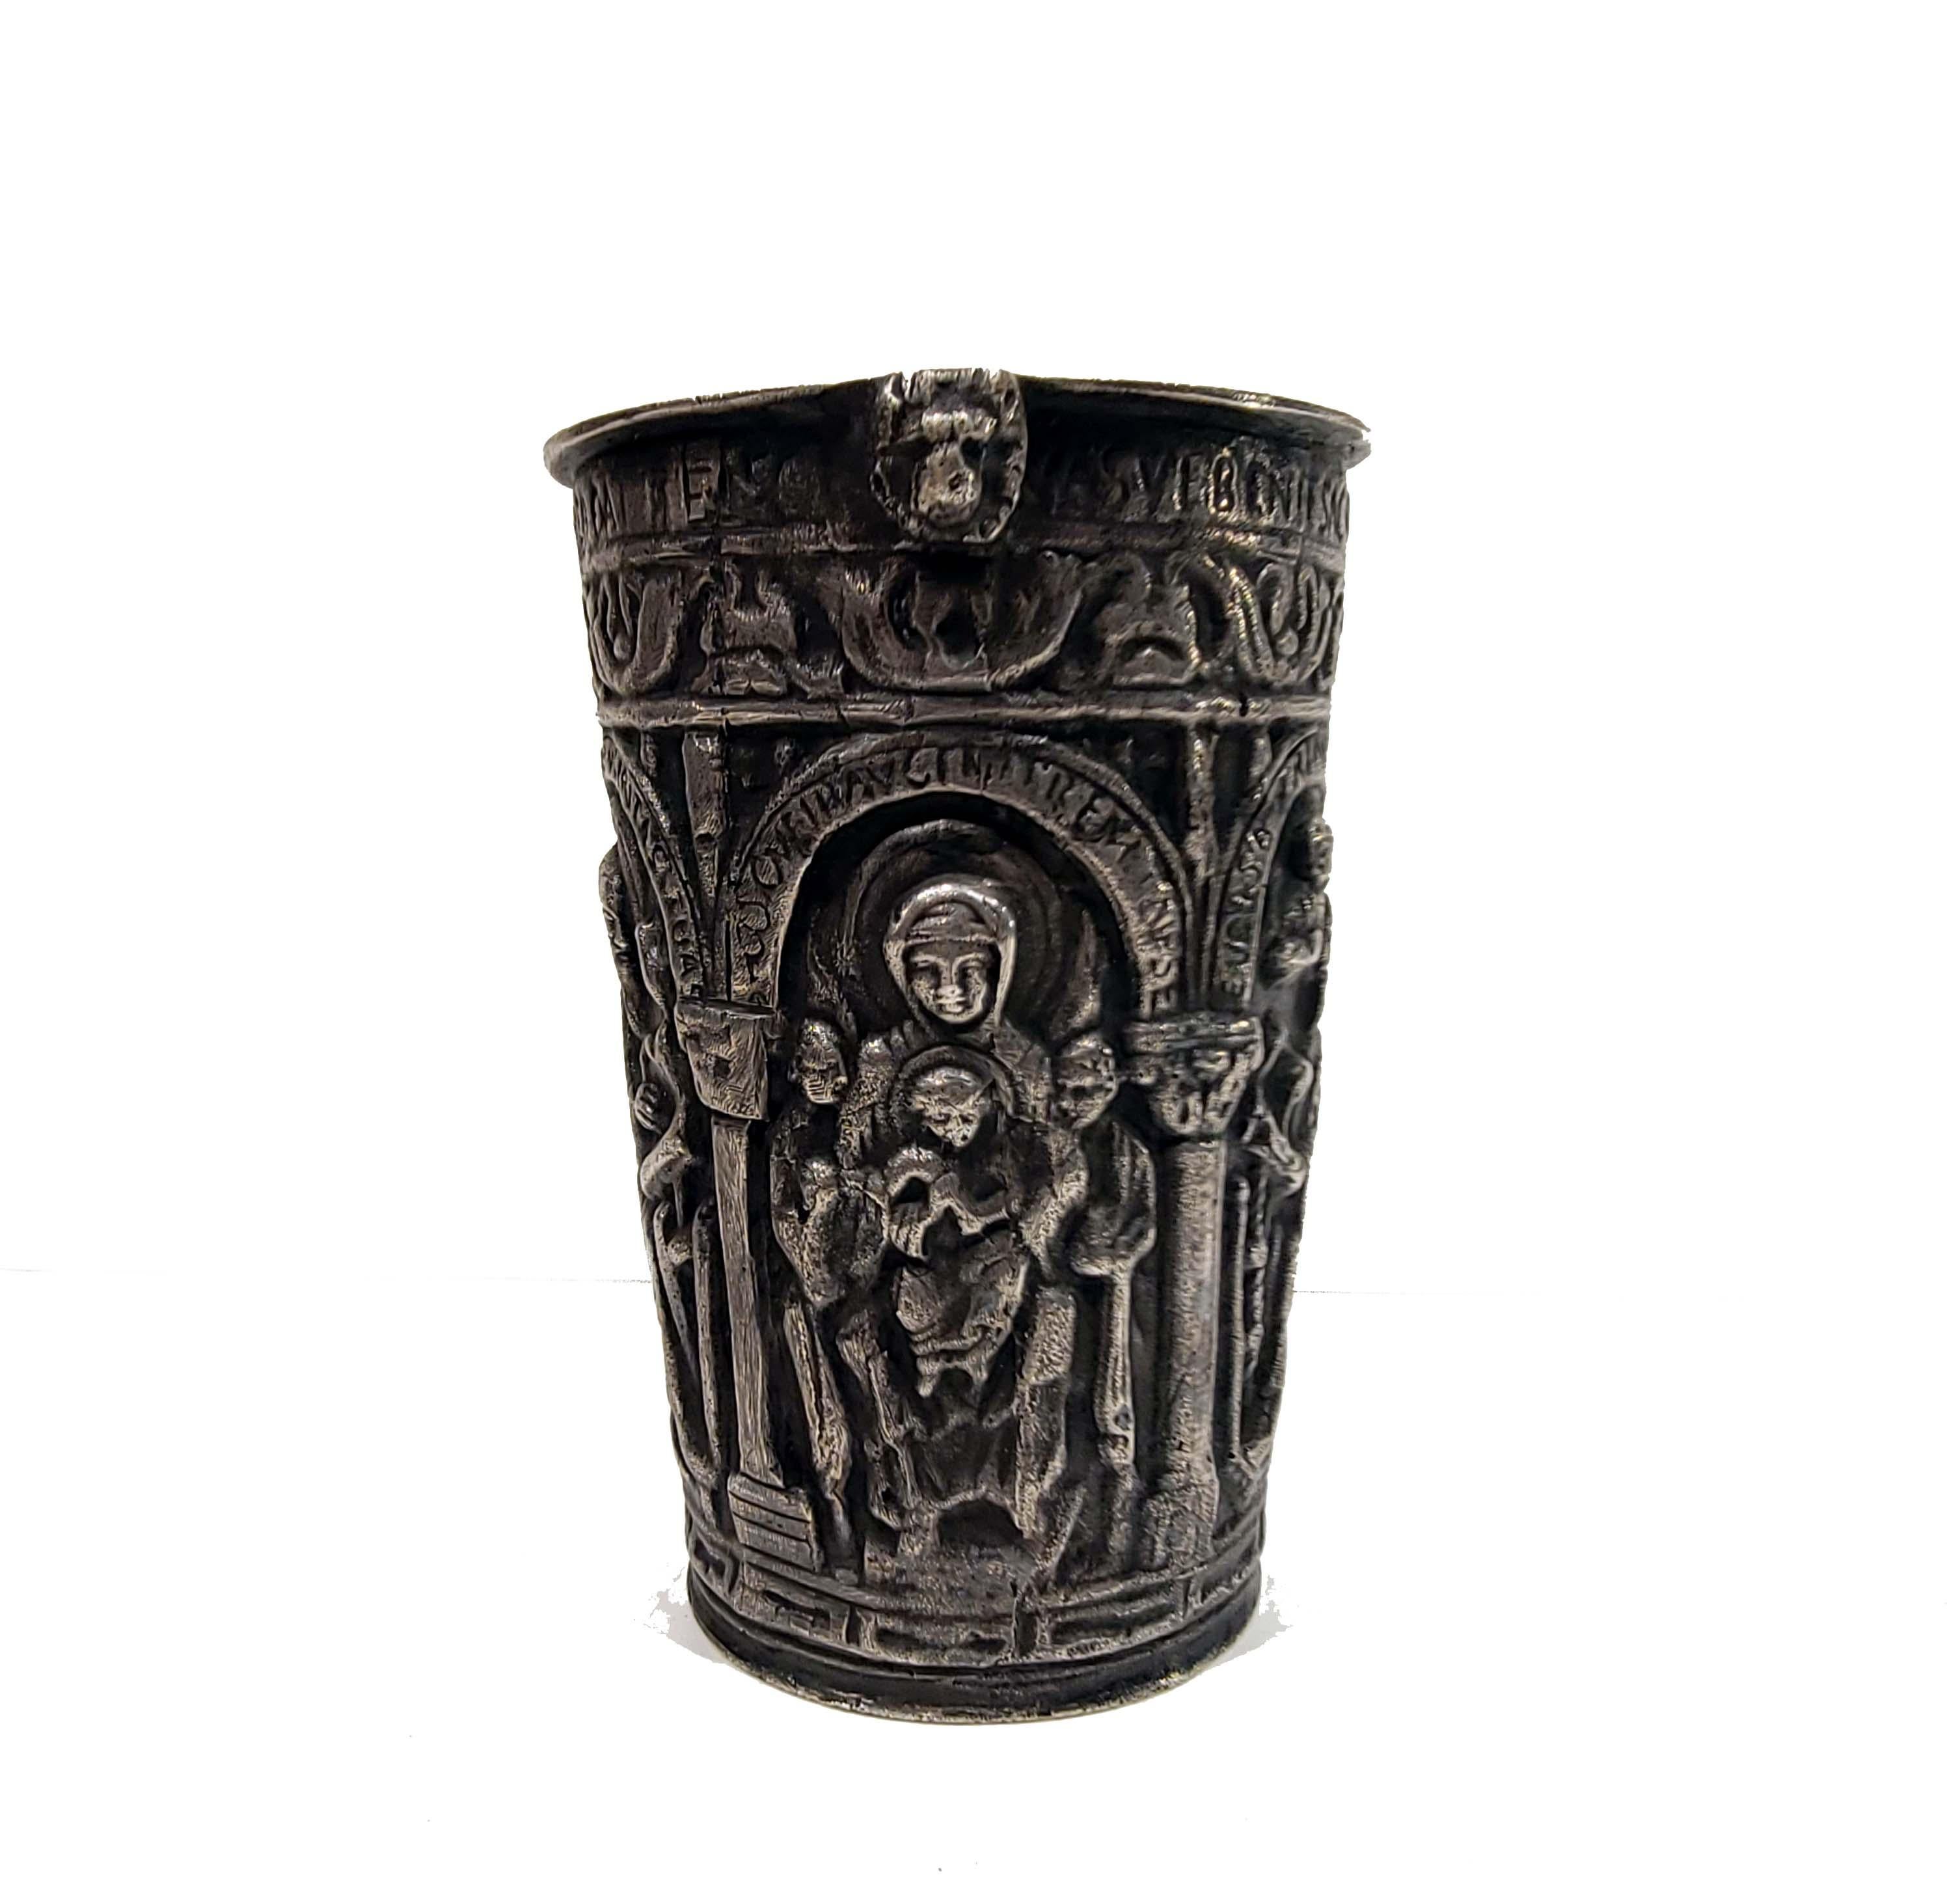 Circa 19th century or earlier, this situla tests silver in some parts and tests low grade silver in other places and tests bronze yet in other parts.
It could be 17th century but we cannot guarantee that. Depicting religious figures on each 4